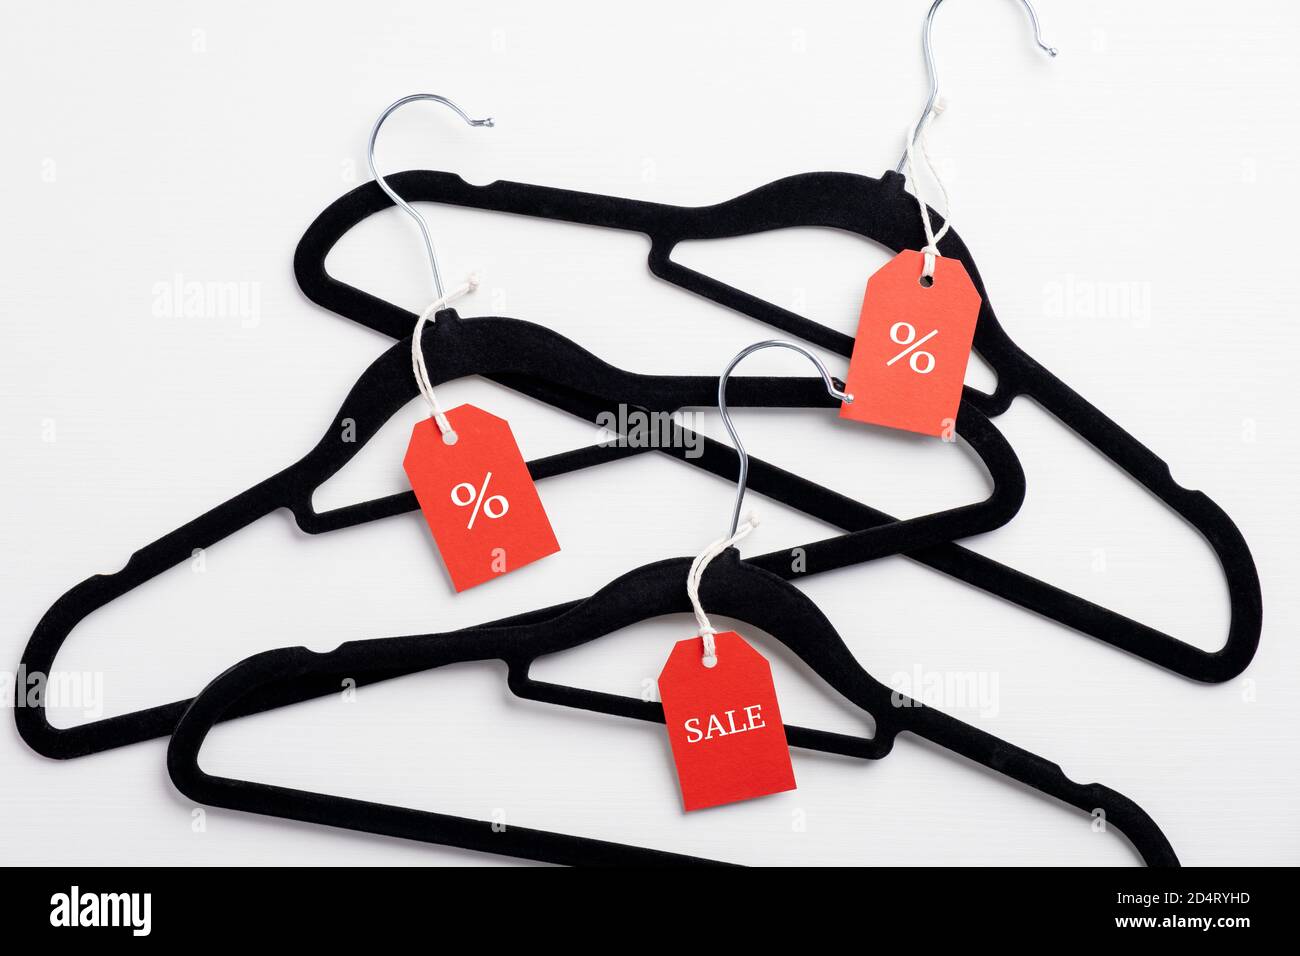 Black Friday sale, discount, outlet concept. Coat hangers with red label tags on white background. Flat lay, top view. Stock Photo